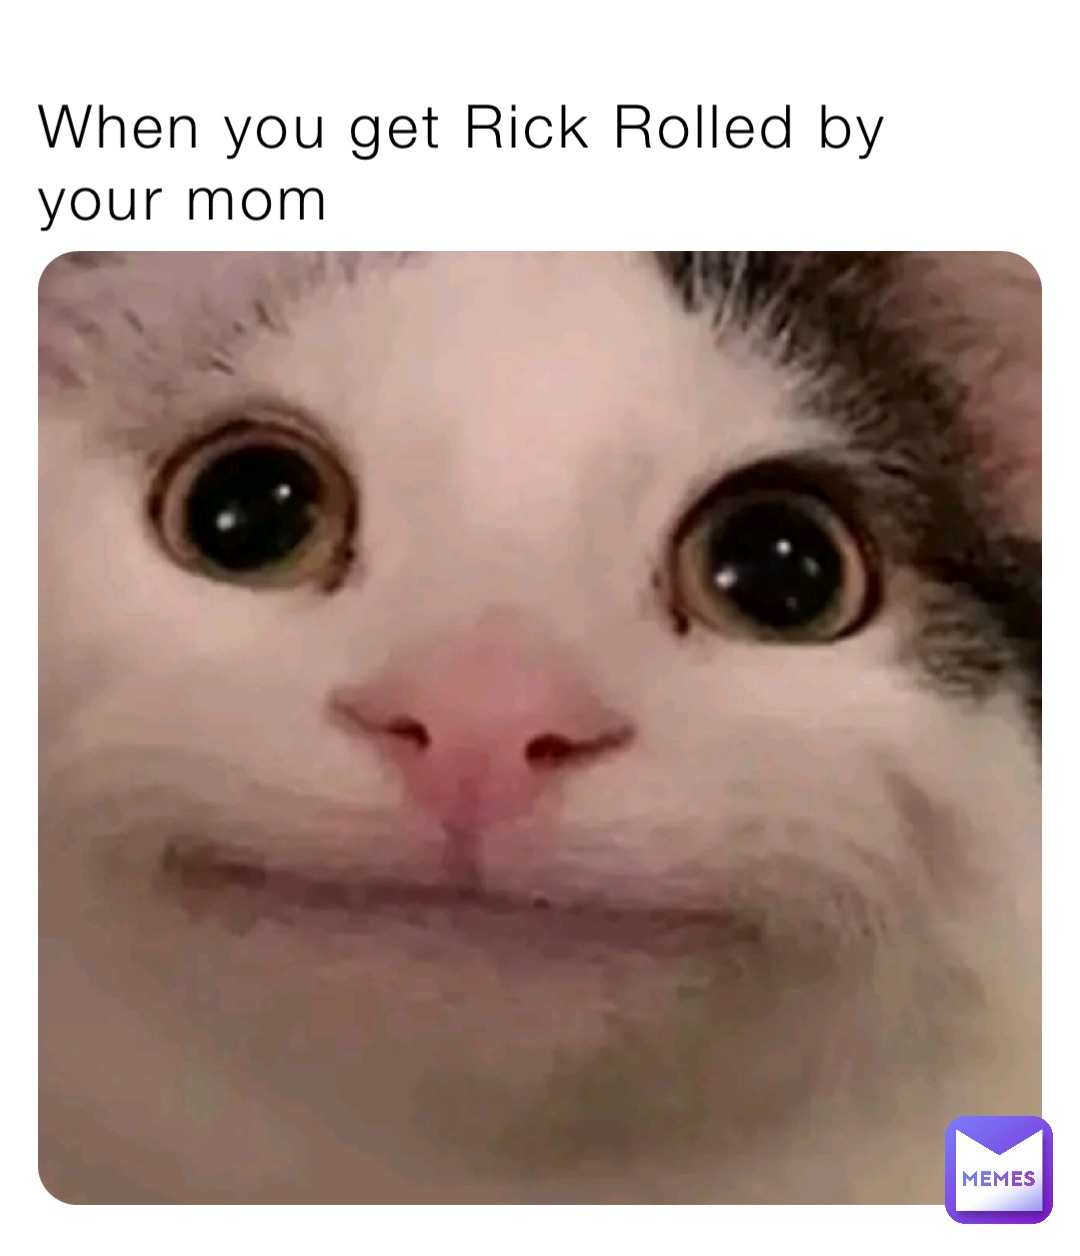 When you get Rick Rolled by your mom